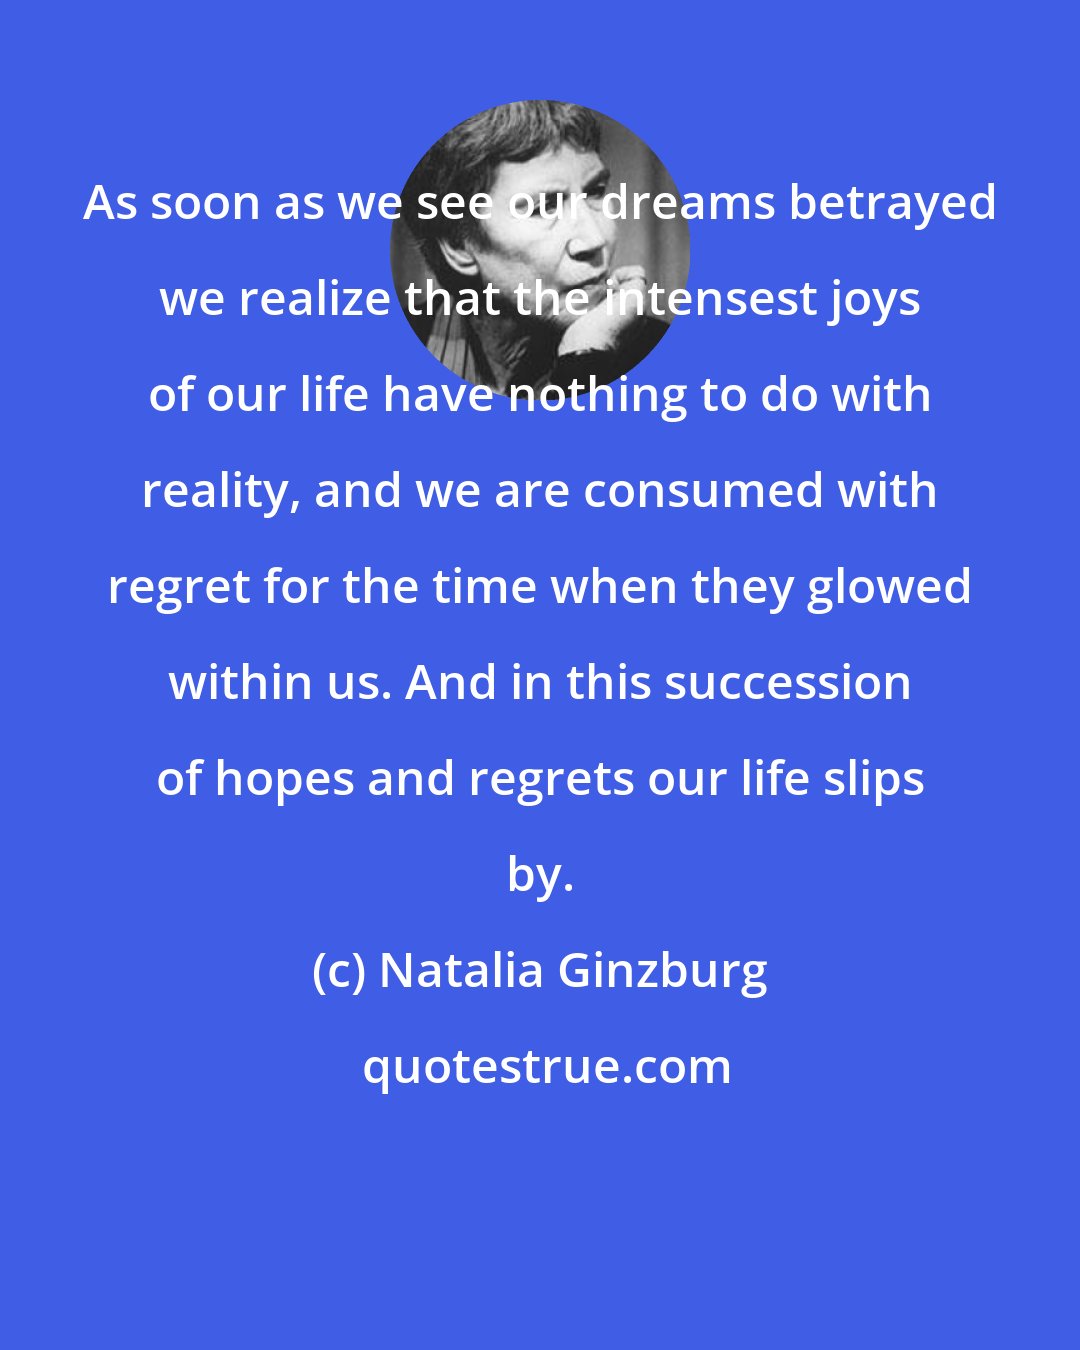 Natalia Ginzburg: As soon as we see our dreams betrayed we realize that the intensest joys of our life have nothing to do with reality, and we are consumed with regret for the time when they glowed within us. And in this succession of hopes and regrets our life slips by.